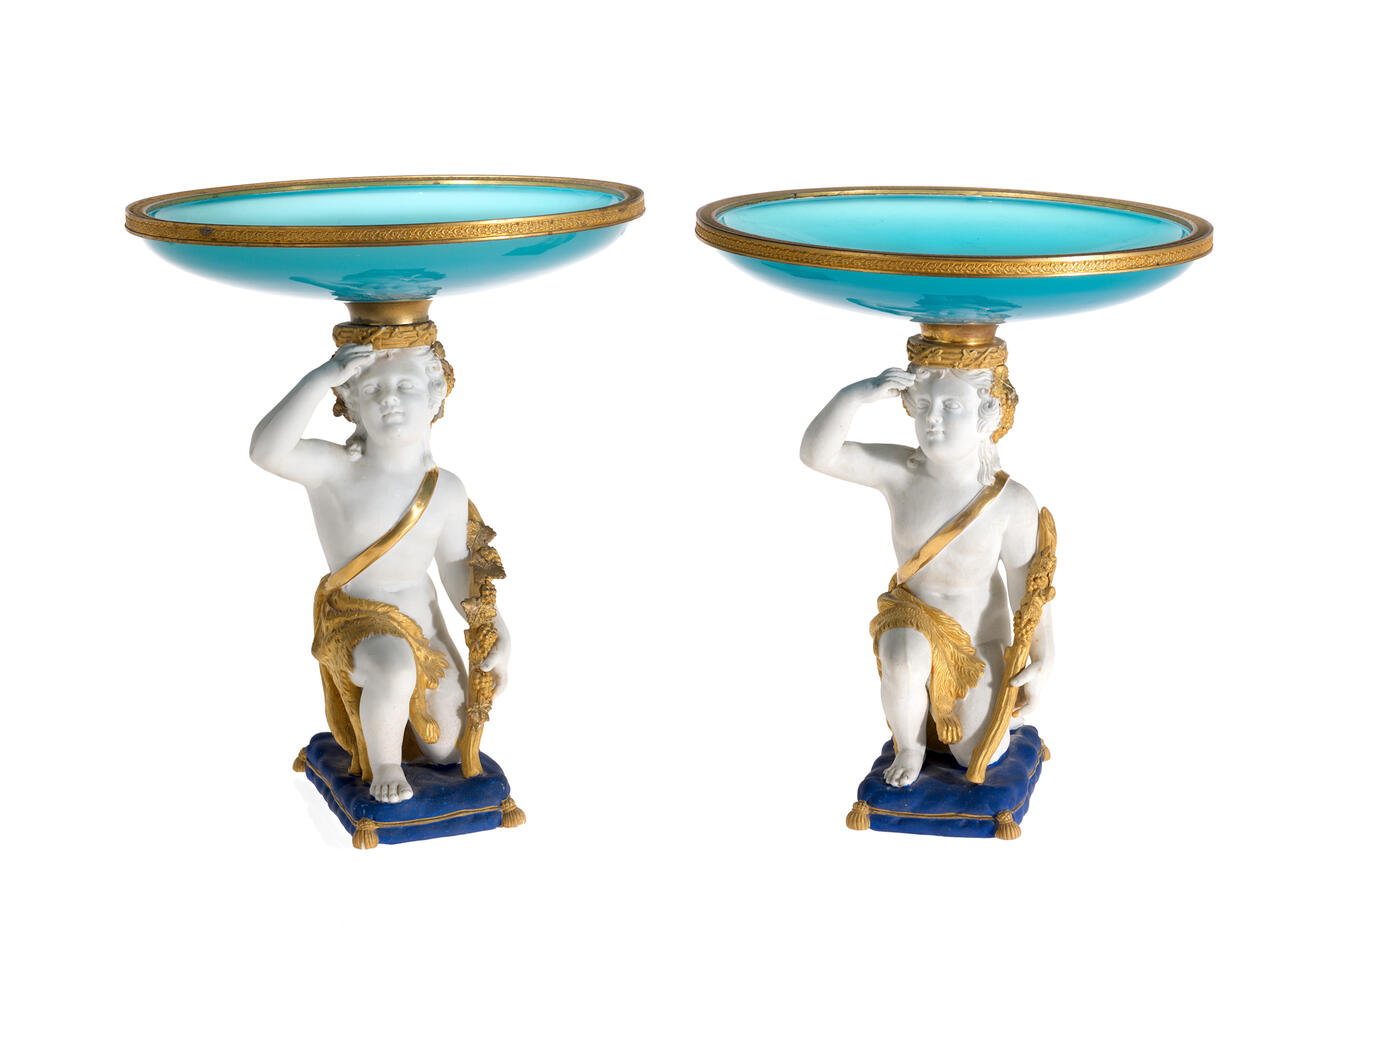 A Pair of Biscuit Porcelain Table Vases